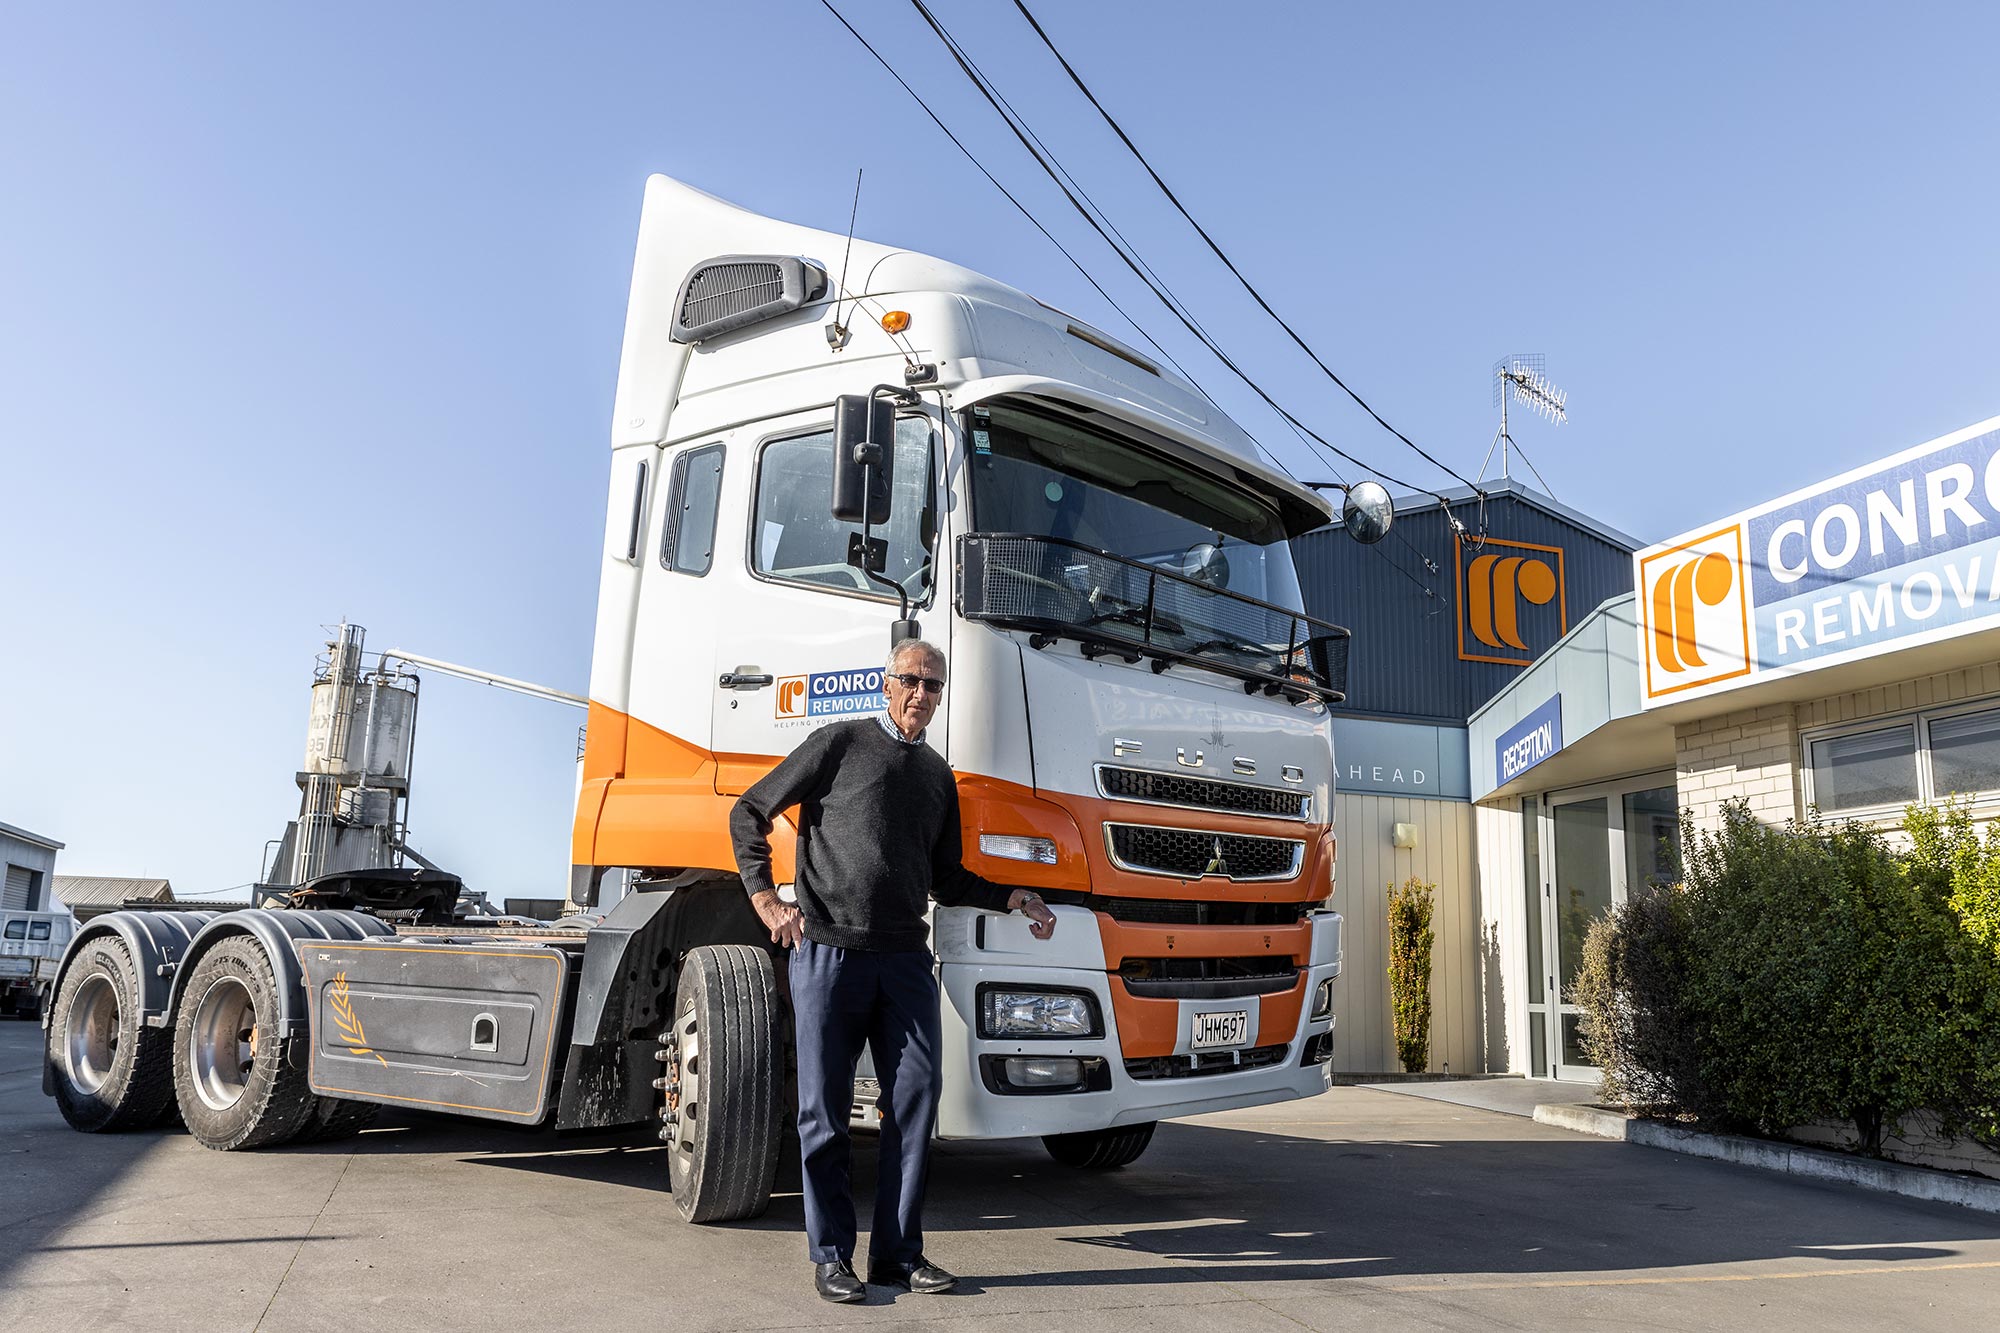 Conroy Removals founder David Conroy sitting in a FUSO truck 